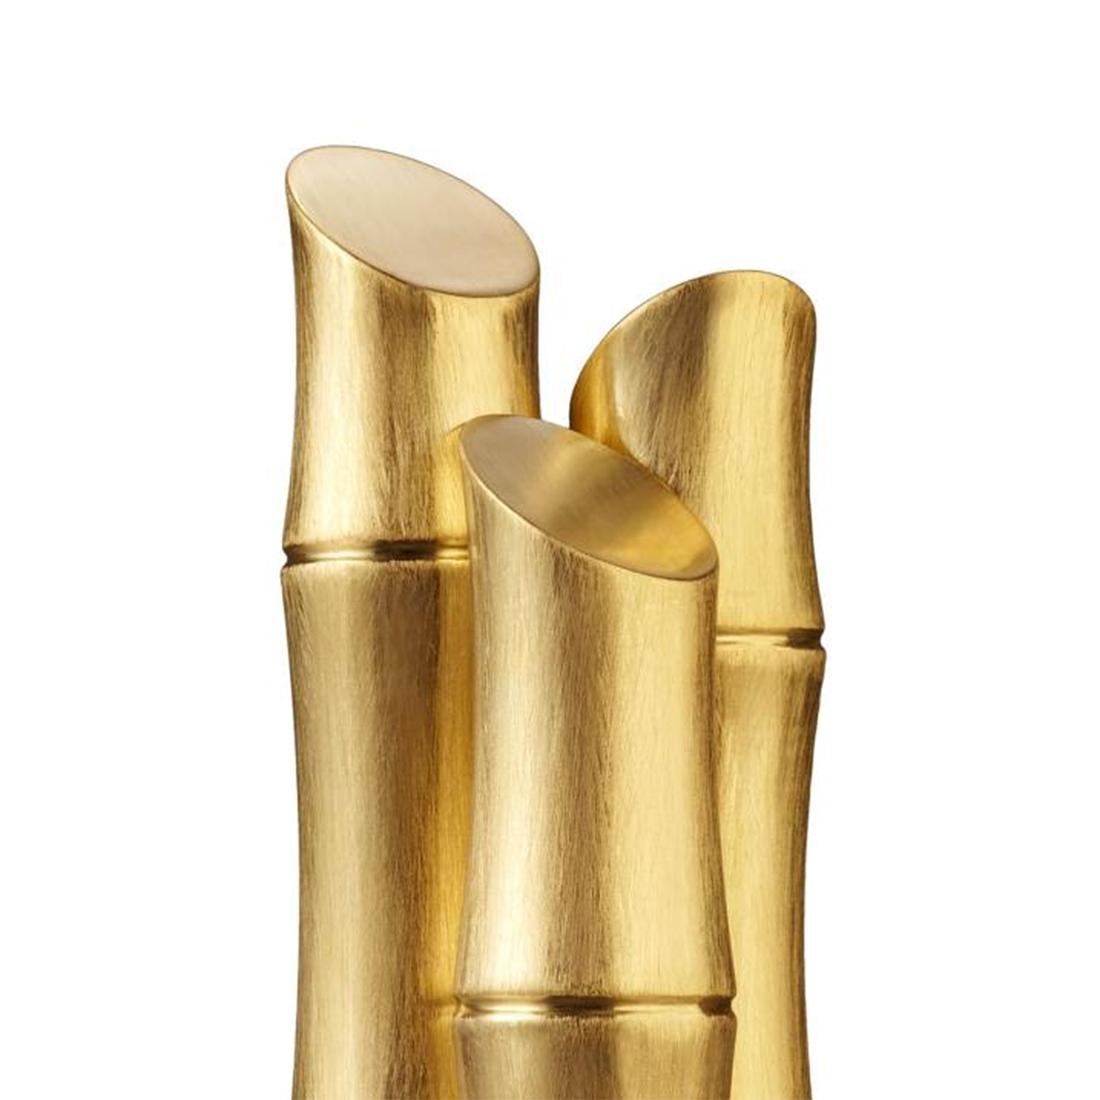 Bookends bamboos gold set of 2 in polished
stainless steel, 24-karat gold-plated handcrafted.
Each piece: L 8 x D 8 x H 20cm.